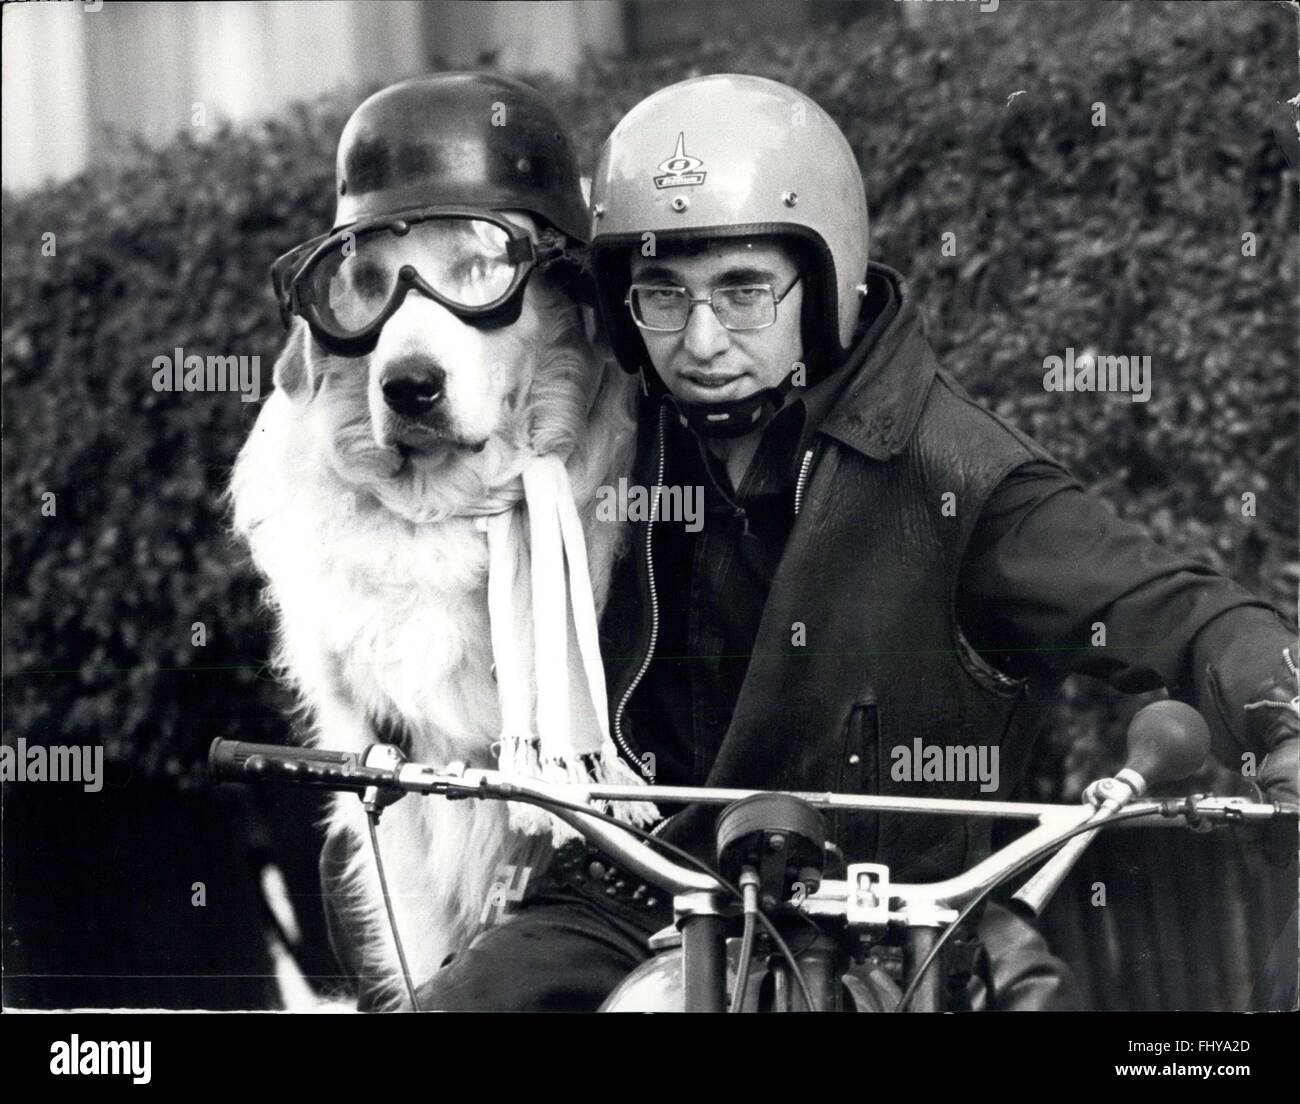 1979 - Too much ! ....Silver smoke, the hell's angel dog: That's his name, 'Too much Silver Smoke'. Smokey to his best friends, like Tony Gatward, his motor cycle friend, Smokey has the speed-bug, and he's no chicken, this dog, he's a real rough-n-tough Hell's Angel, don't let his refined pedigree fool you. He is an aristocrat amongst dogs a pyrenean mountain dog who has already qualified for Crufts in Feb, 1975. He is 3 year old, weighs 11stone, and stands 6ft high on two legs a magnificent spectacle, especially in his Hell's Angel gear, he can be seen striding down the streets of Leigh-on-se Stock Photo